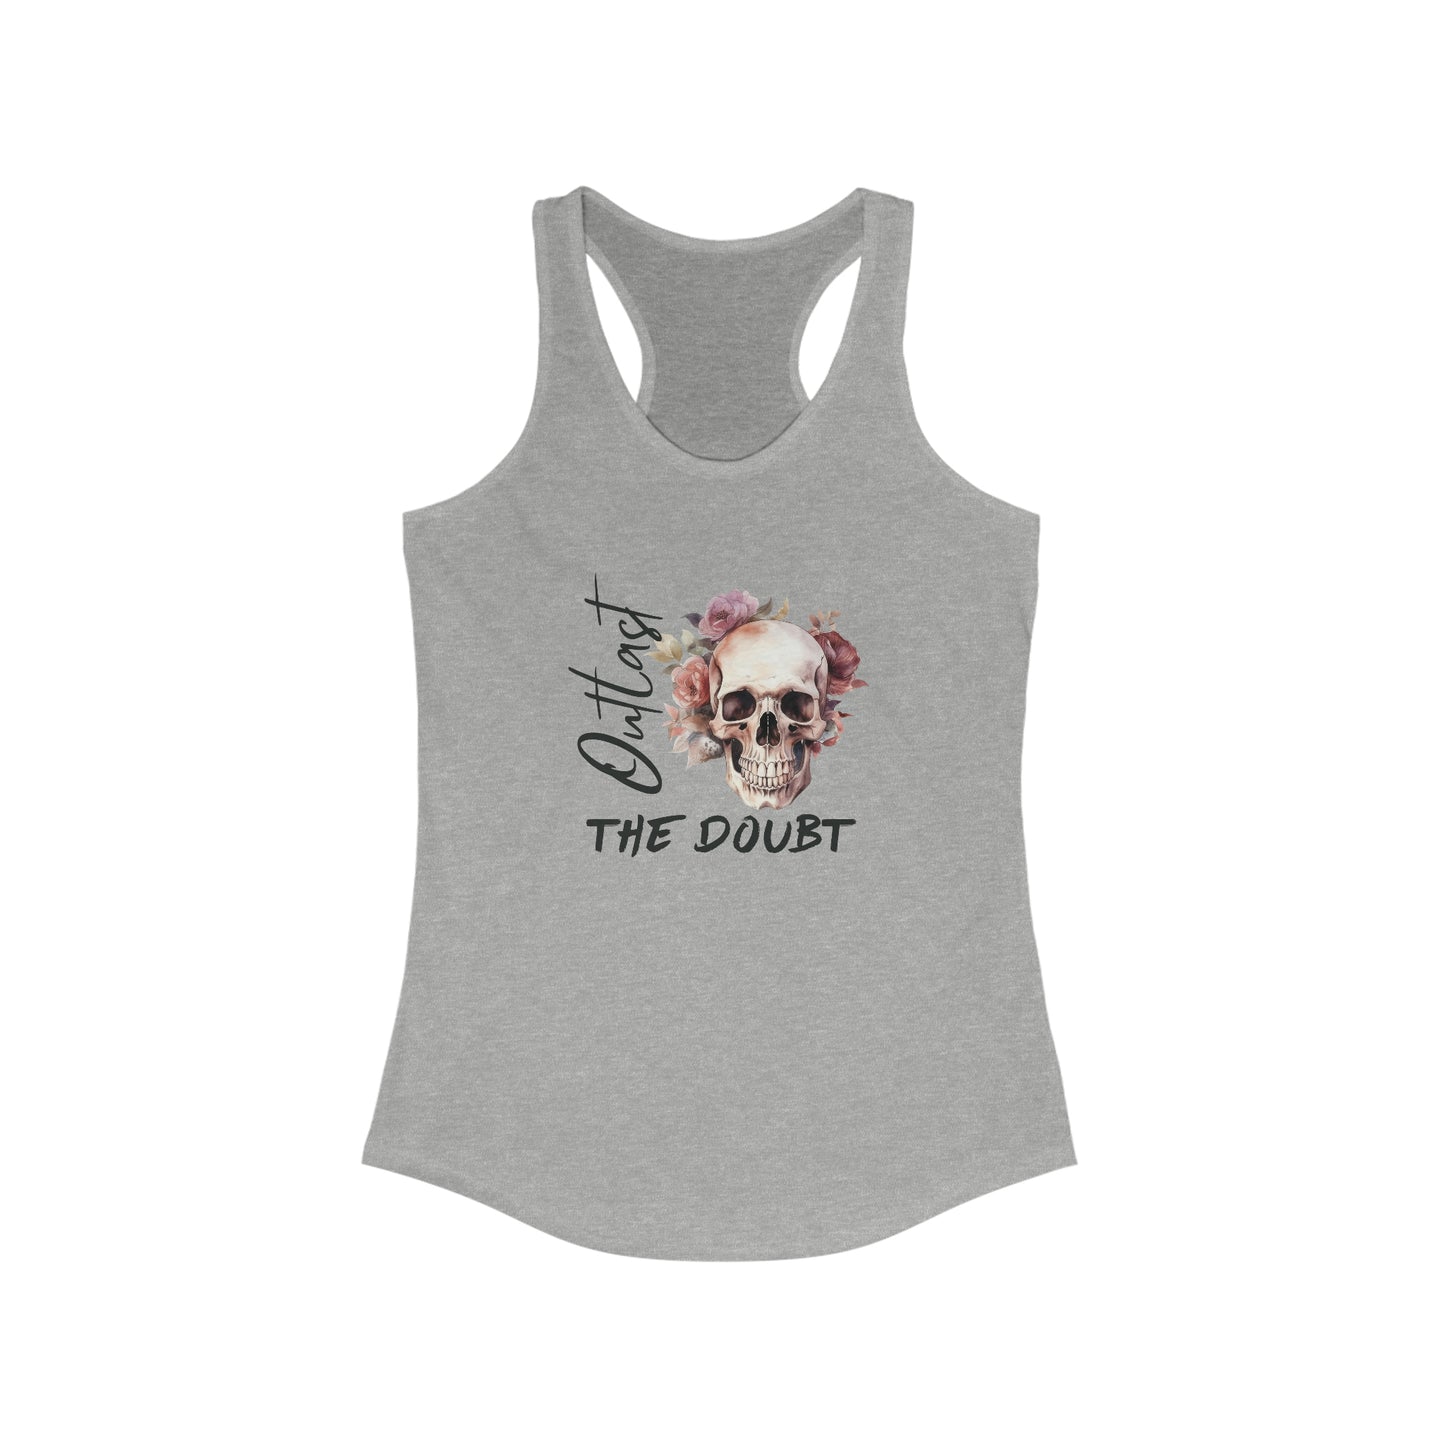 Outlast The Doubt - Skull Tank Top